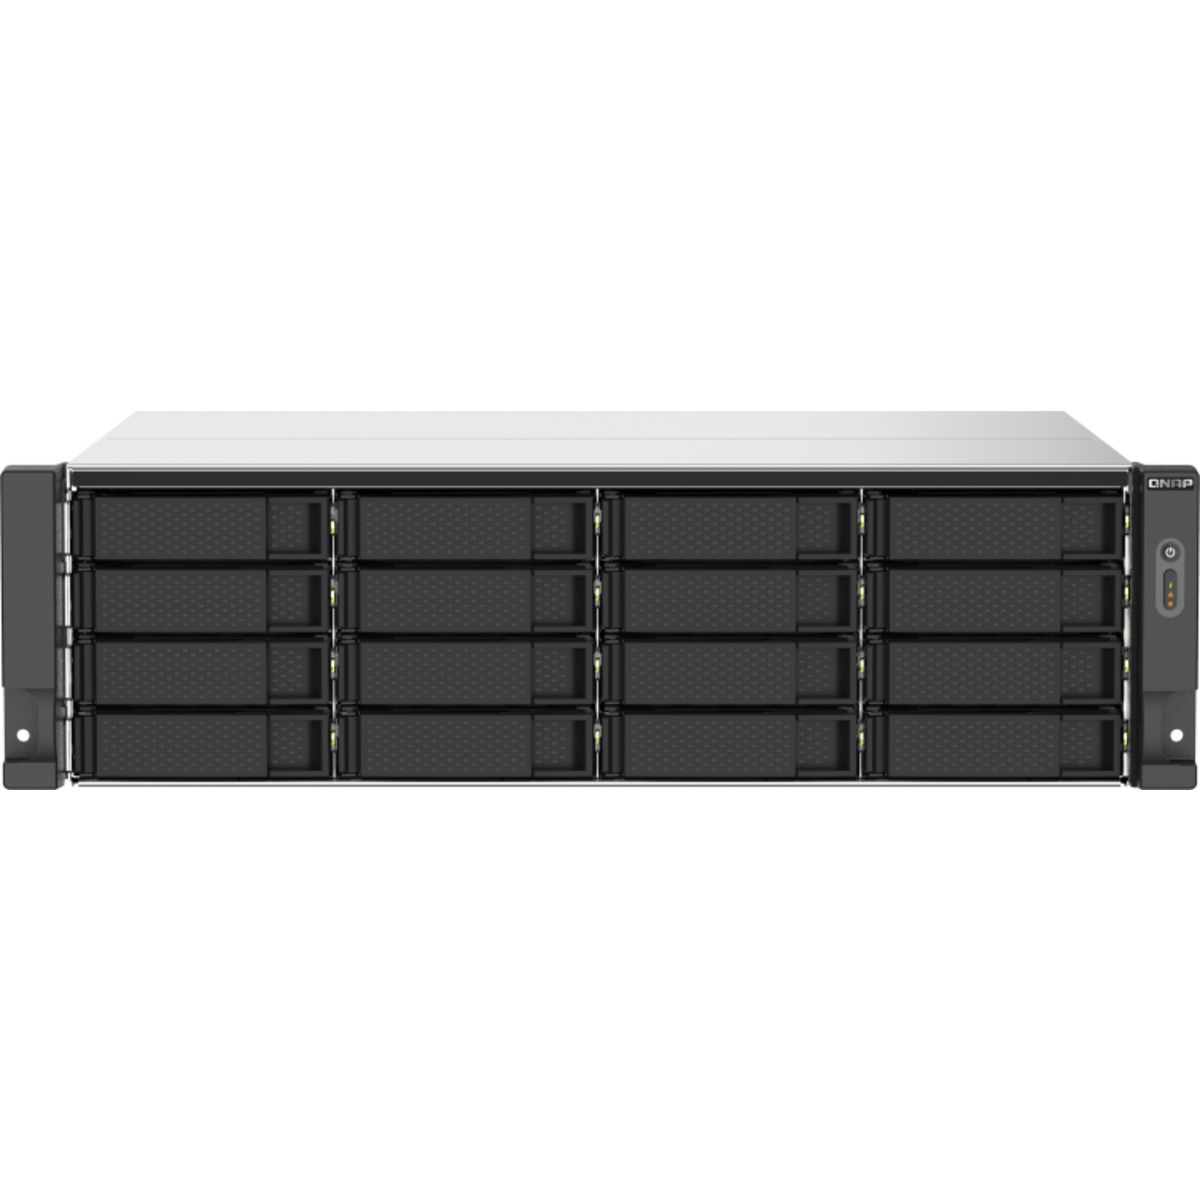 QNAP TS-1673AU-RP 224tb 16-Bay RackMount Multimedia / Power User / Business NAS - Network Attached Storage Device 14x16tb Seagate EXOS X18 ST16000NM000J 3.5 7200rpm SATA 6Gb/s HDD ENTERPRISE Class Drives Installed - Burn-In Tested - FREE RAM UPGRADE TS-1673AU-RP